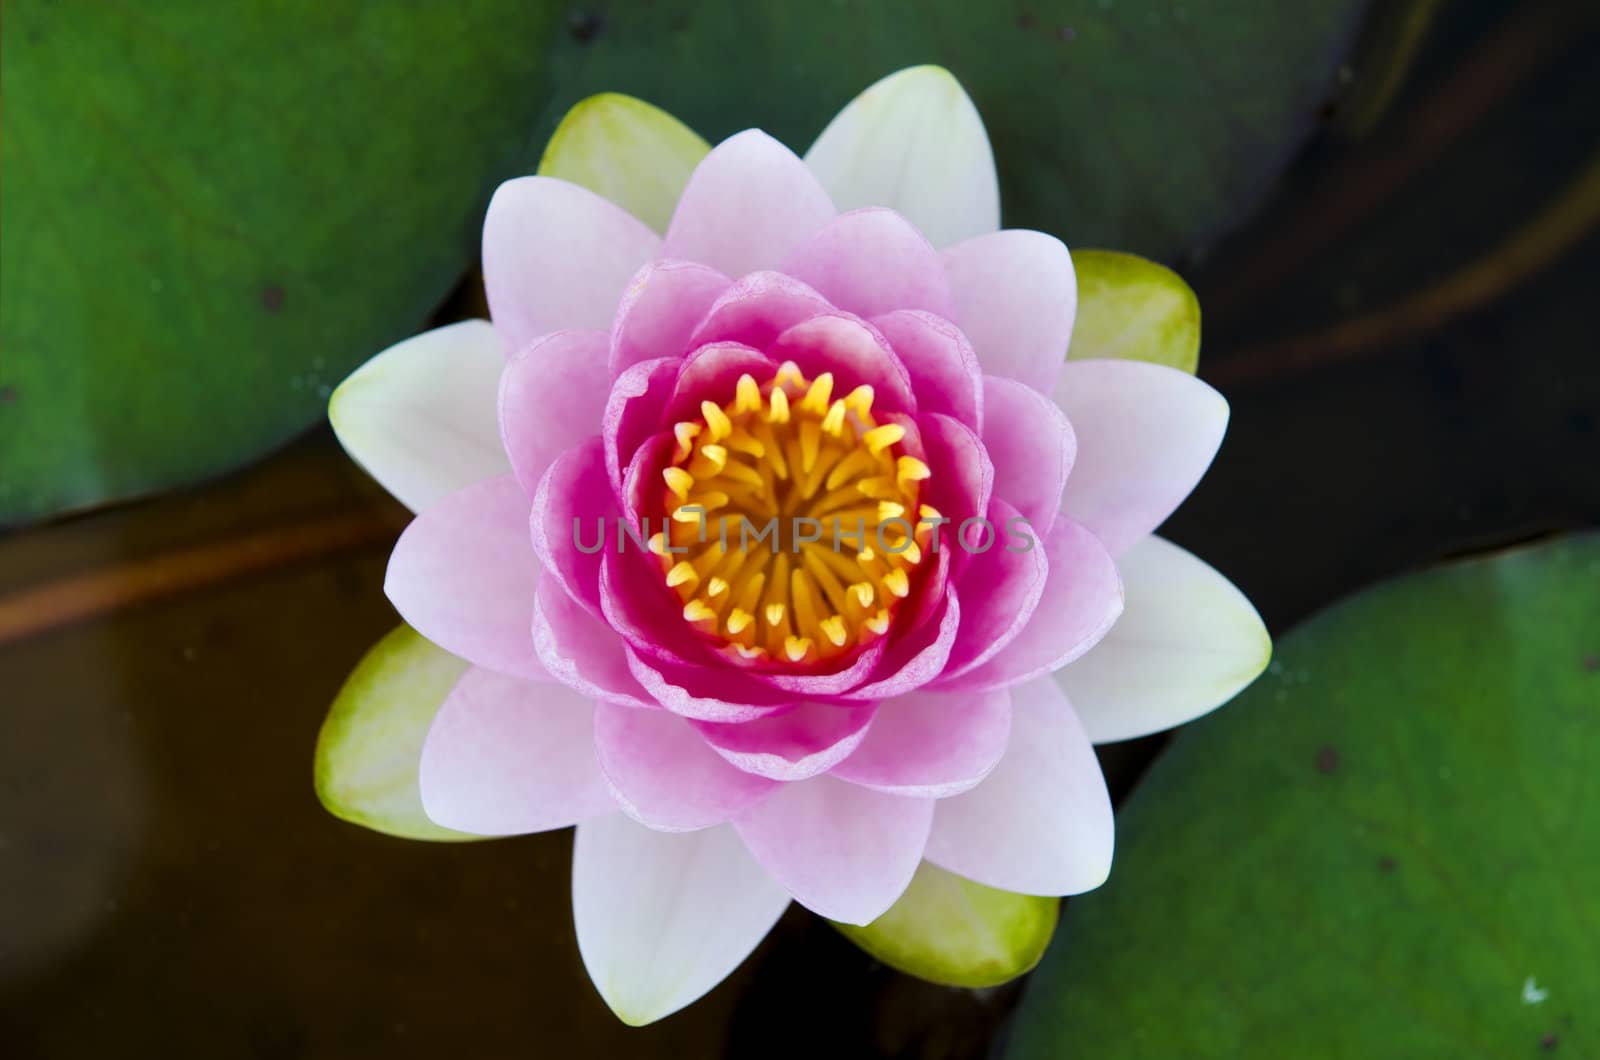 symmetrical lotus for conceptual photo  by yuliang11